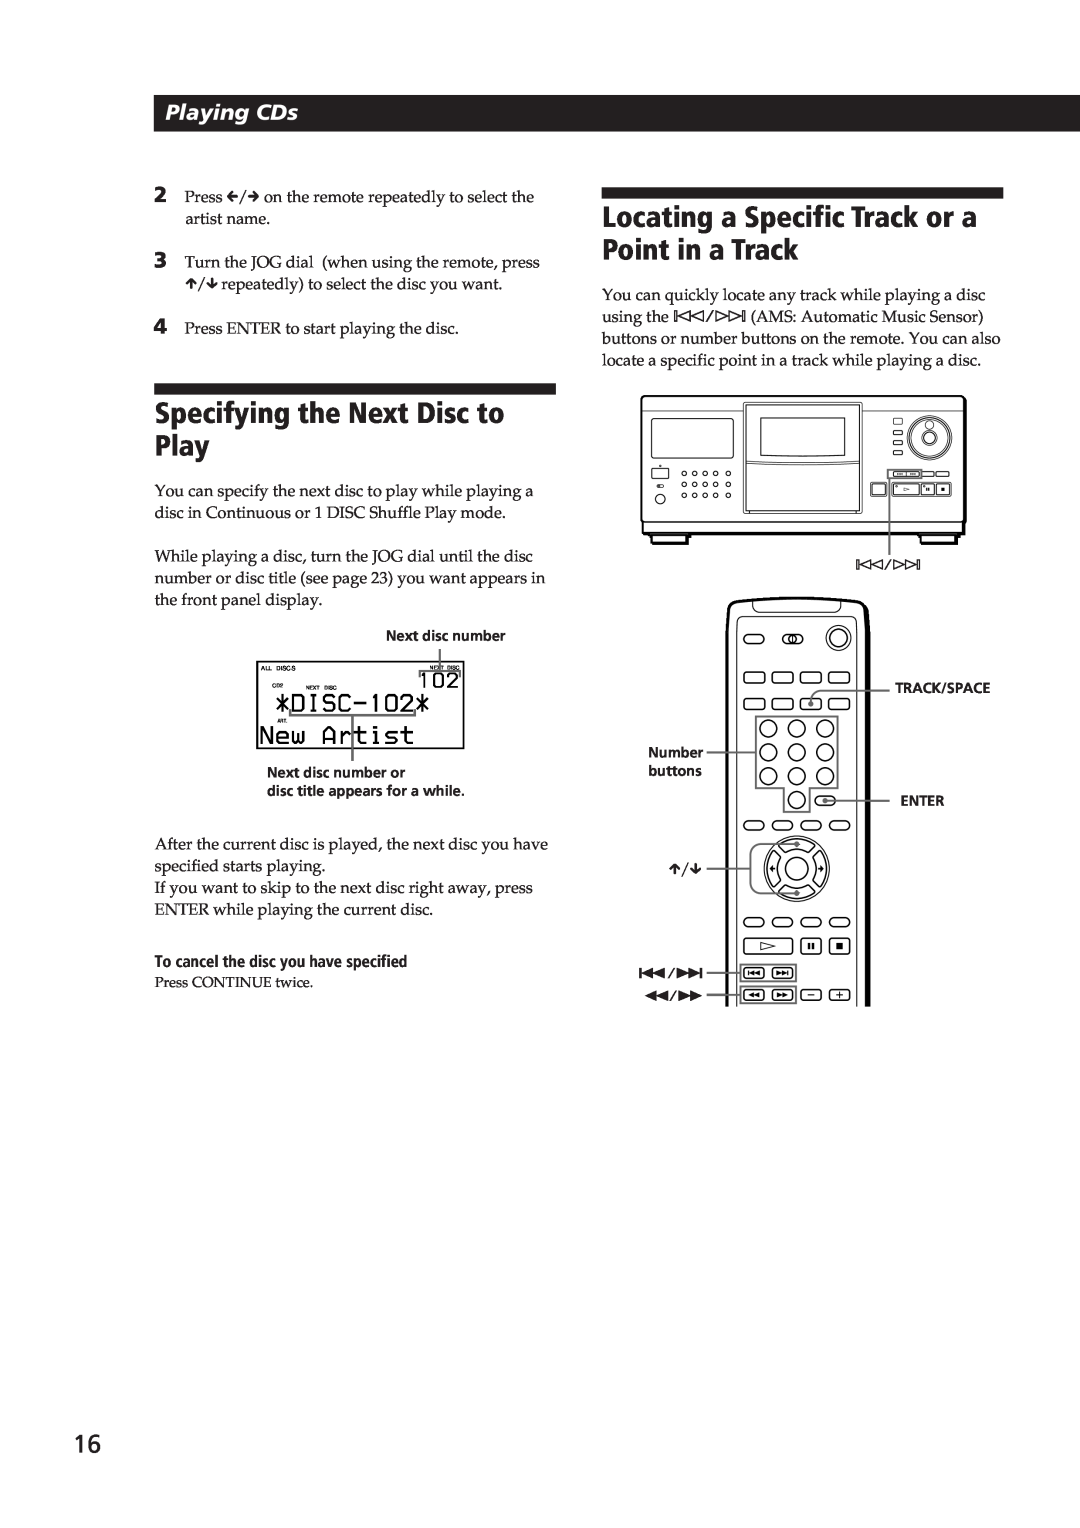 Sony Ericsson CDP-CX270 manual Specifying the Next Disc to Play, Locating a Specific Track or a Point in a Track, DISC-1O2 